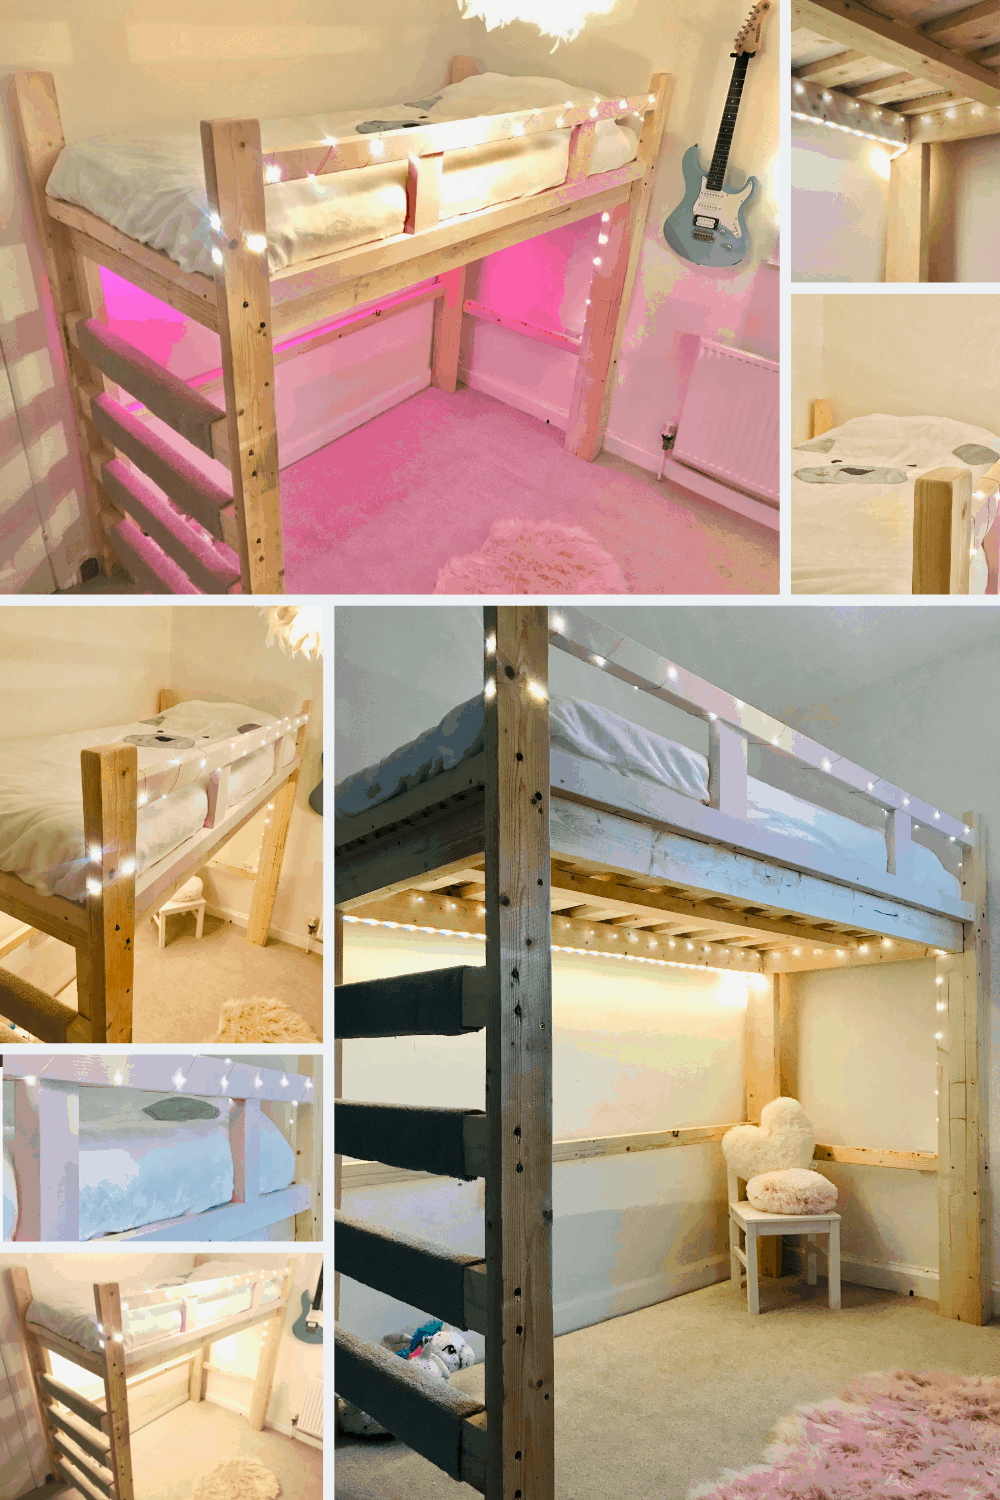 Stunning Bedroom Makeover You Can Do On A Really Small Budget - Including Embarrassing Before Pics | DIY Home decor | Bedroom Makeover Ideas | Small bedroom ideas | DIY bed | DIY projects | Home decor on a budget | Via https://themummyfront.com #themummyfront #bedroommakeover #bedroommakeoveronabudget #bedroommakeoverideas #homedecoronabudget #diyhomedecor